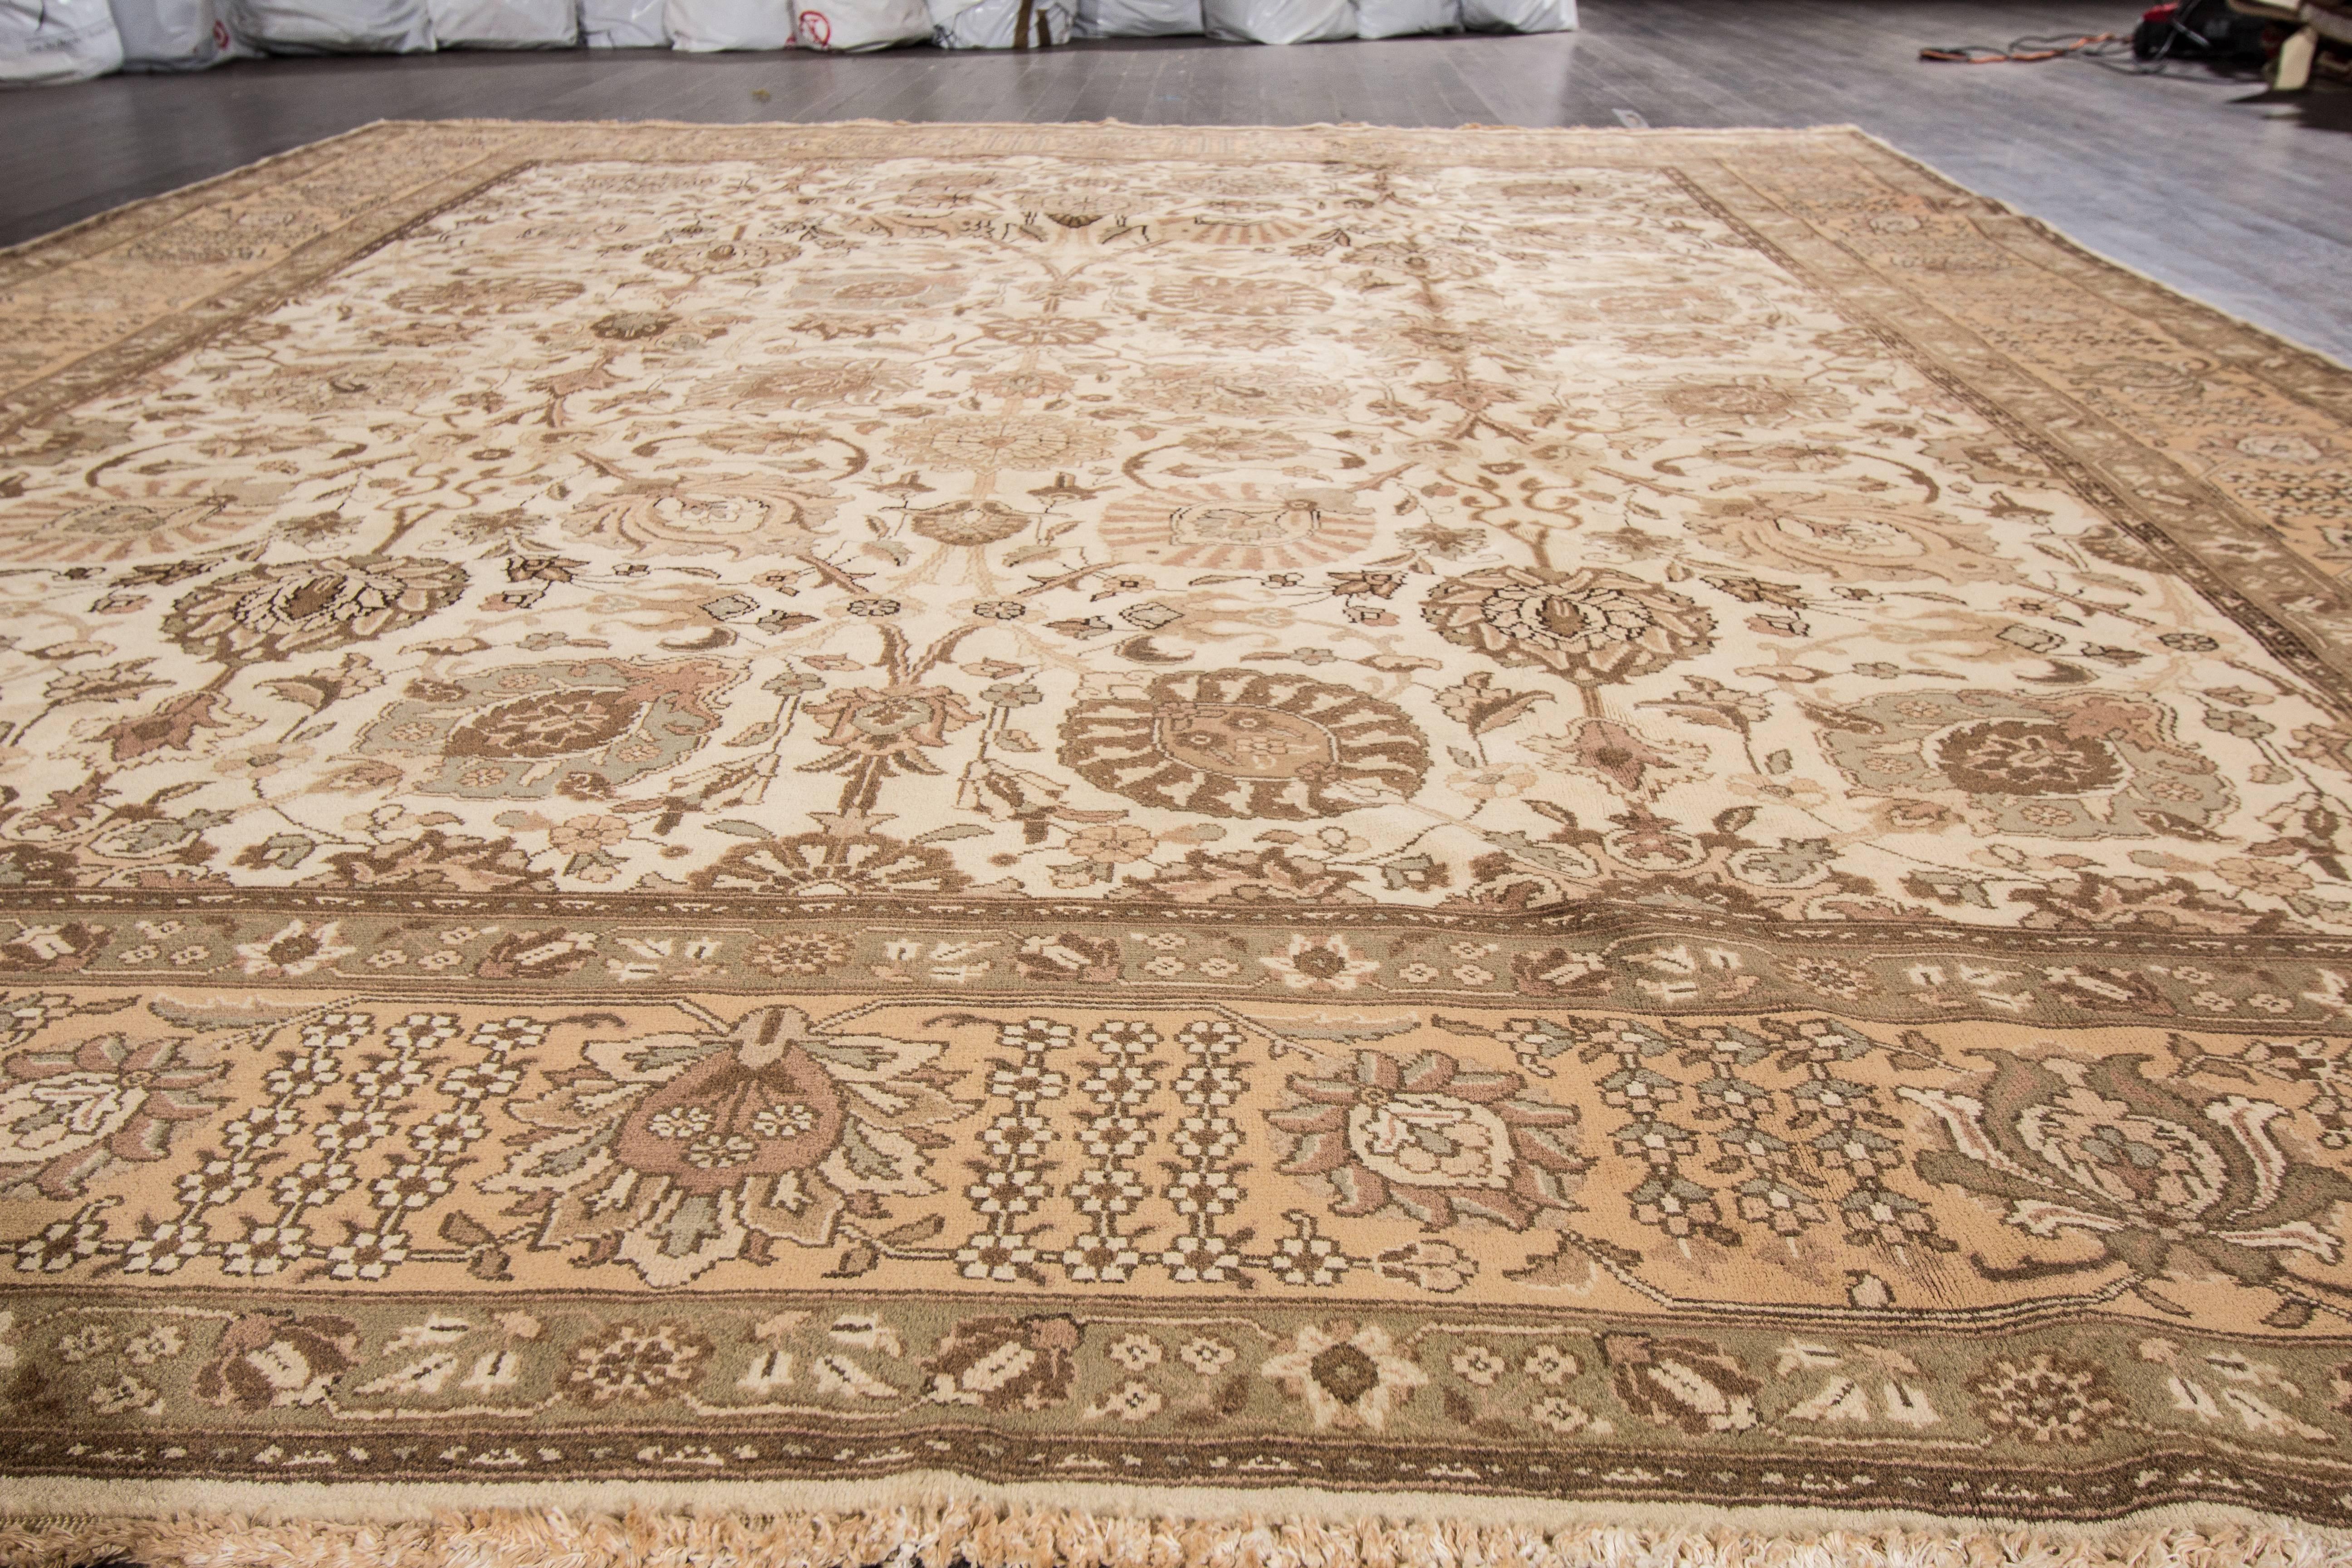 Beautifully Designed Antique Tabriz Rug In Good Condition For Sale In Norwalk, CT